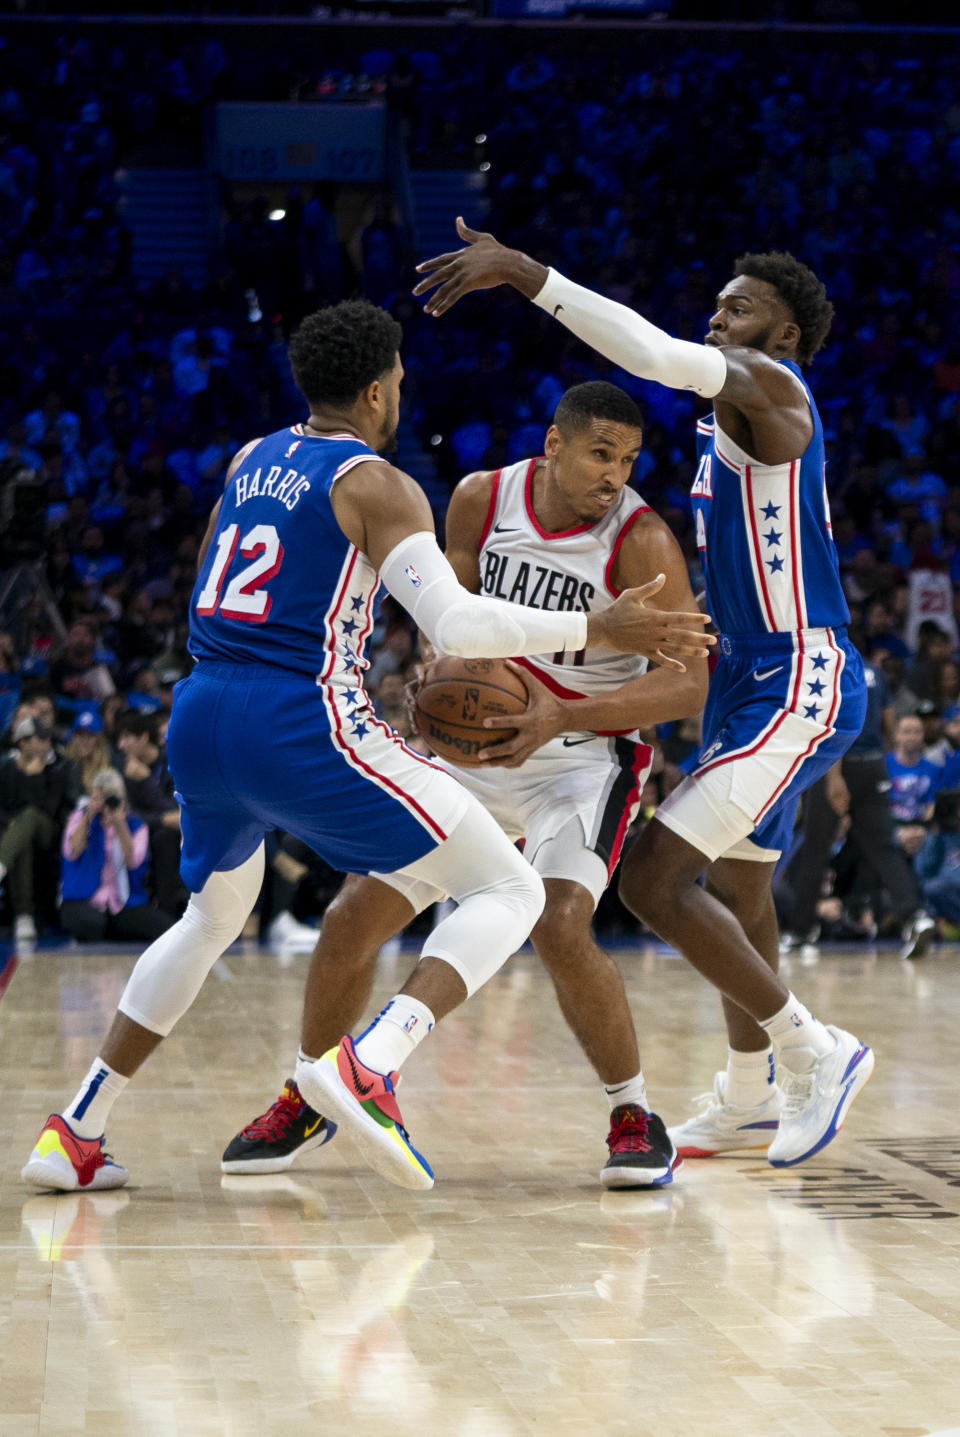 Portland Trail Blazers' Malcolm Brogdon, center, tries to make his move while being guarded by Philadelphia 76ers' Paul Reed, right, and Tobias Harris, left, during the first half of an NBA basketball game, Sunday, Oct. 29, 2023, in Philadelphia. (AP Photo/Chris Szagola)